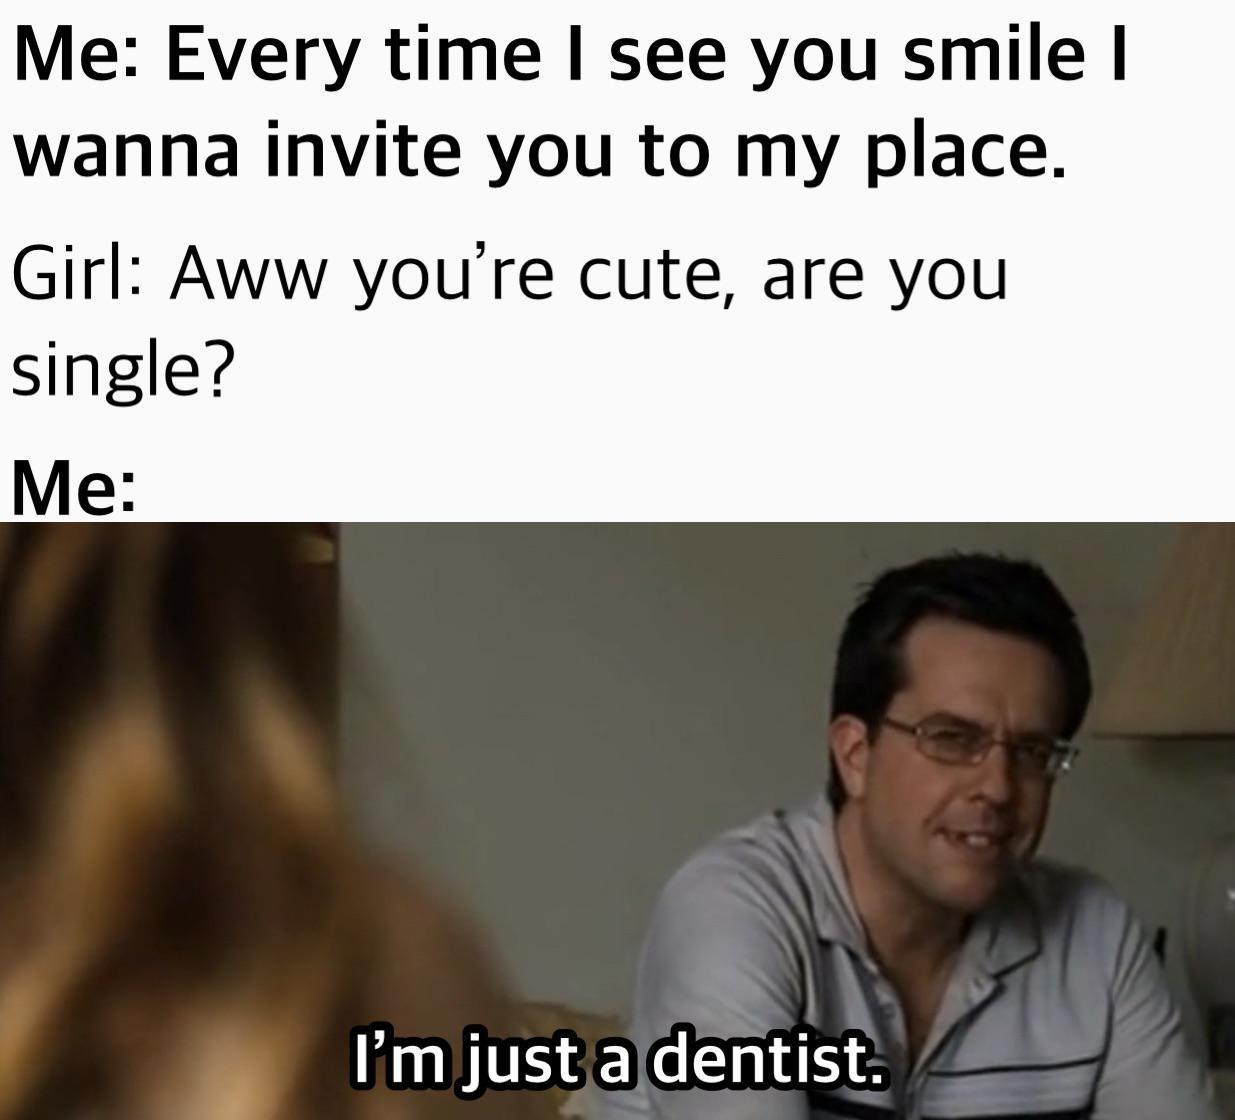 dank memes - photo caption - Me Every time I see you smile | wanna invite you to my place. Girl Aww you're cute, are you single? Me I'm just a dentist.